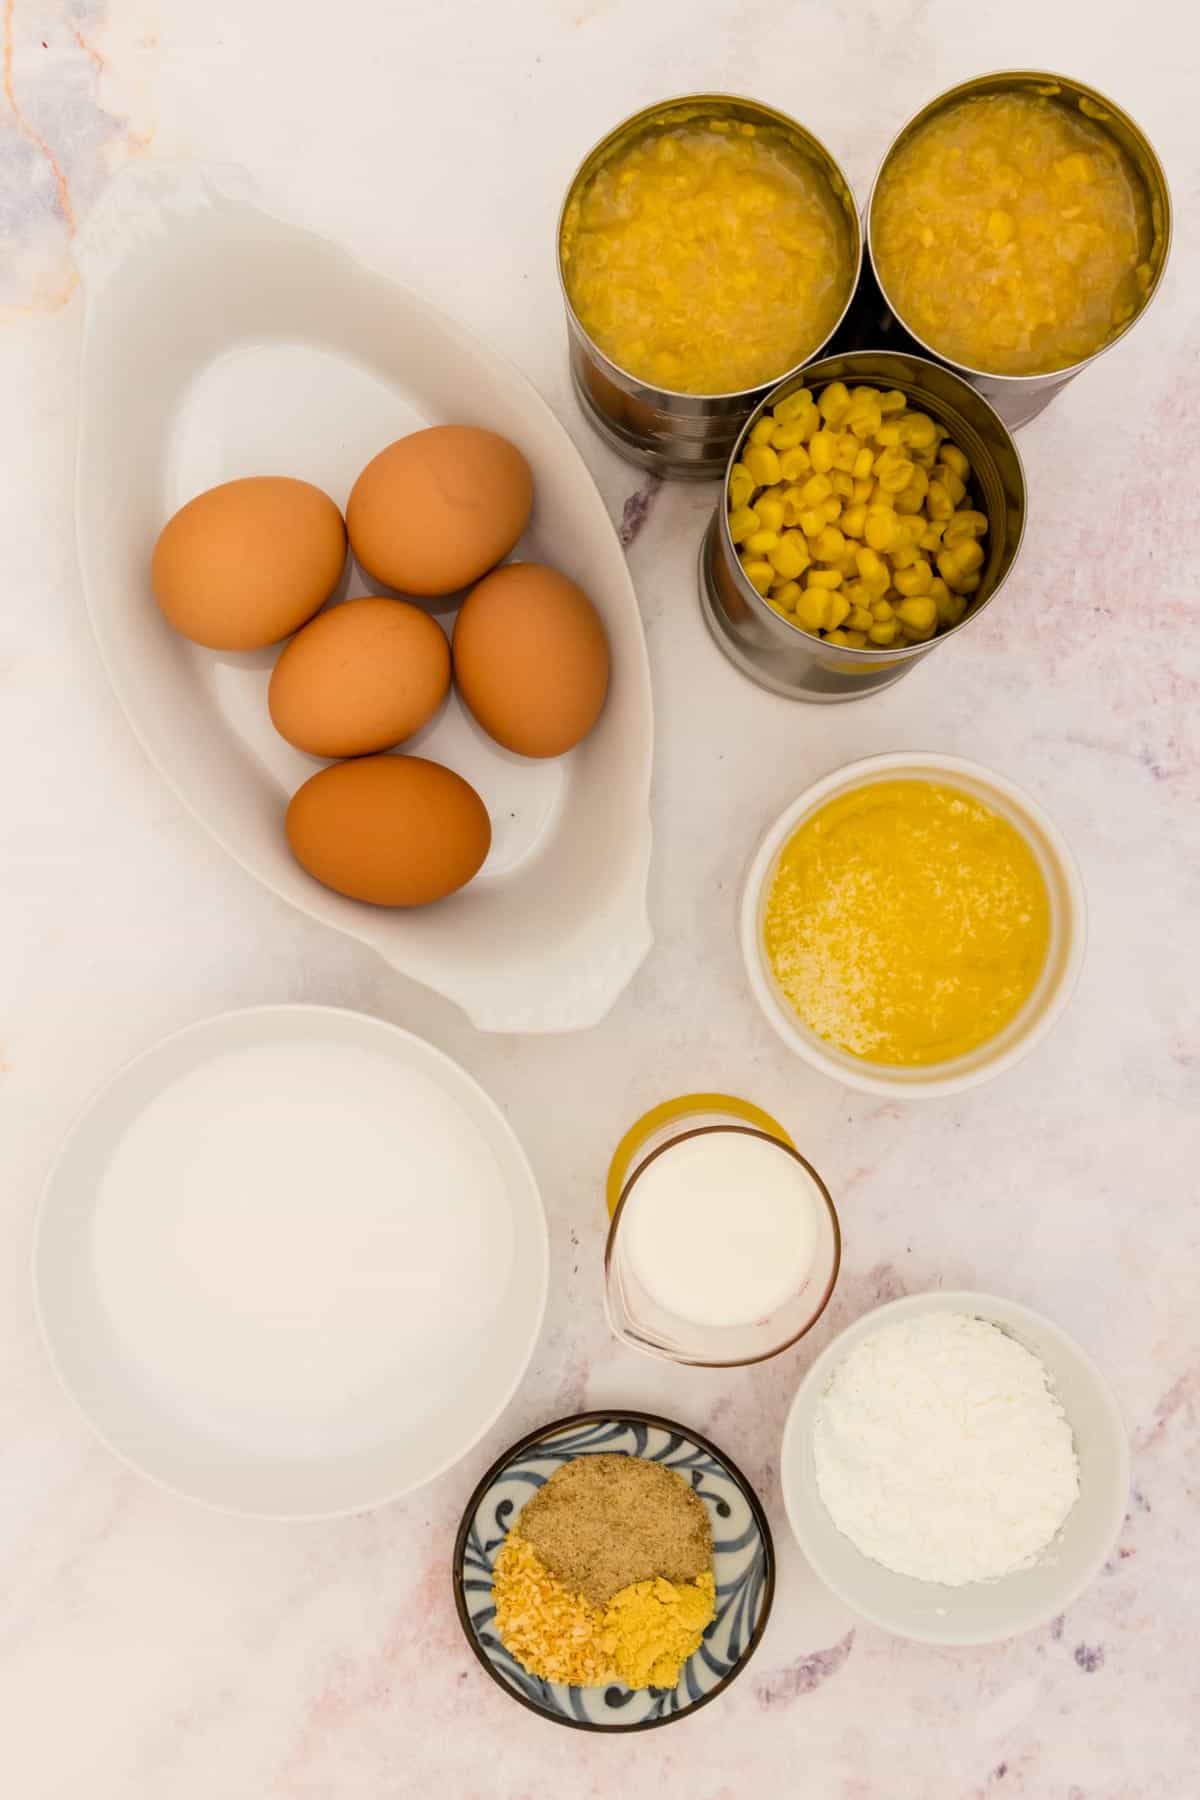 Corn pudding ingredients in bowls and containers on a marble countertop.